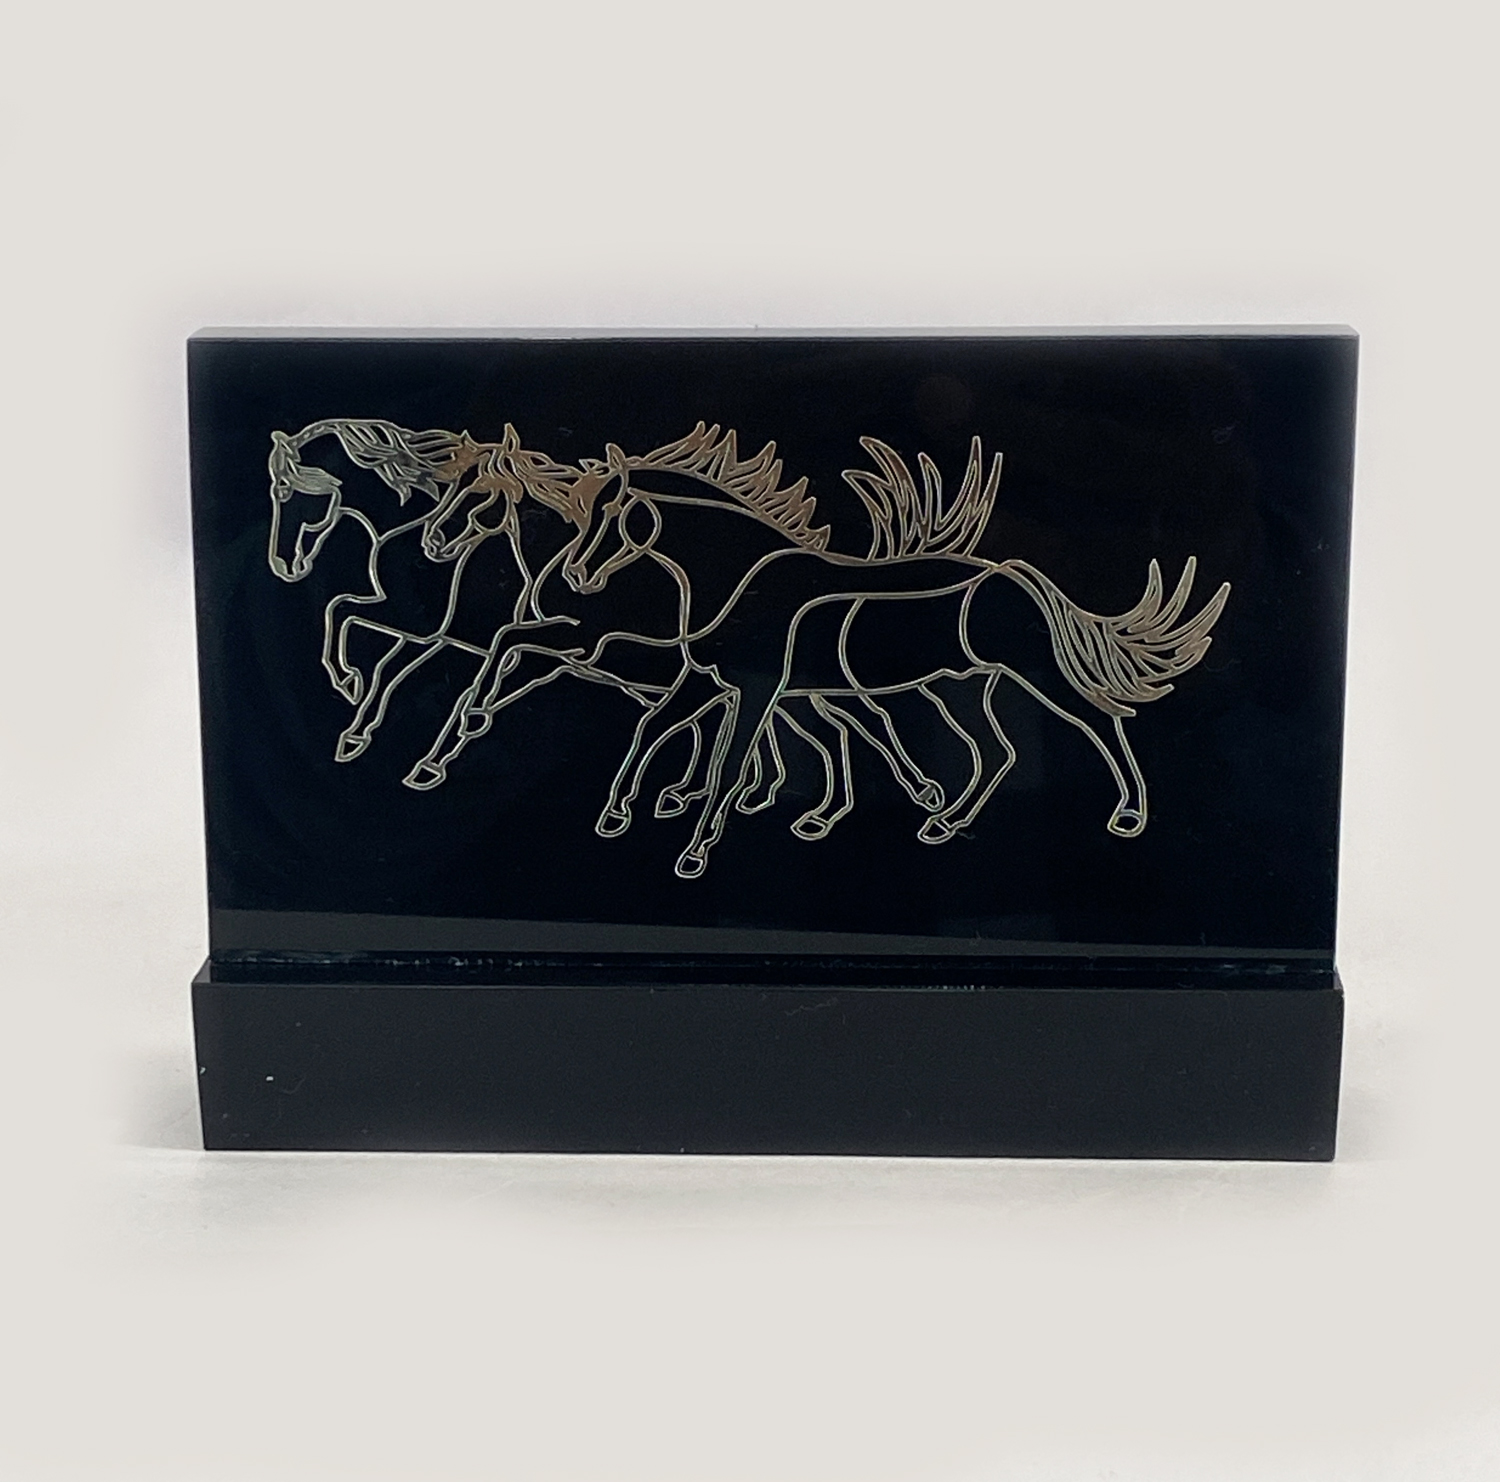 Silver Foil cutout of a Running Horses | 5 Inch